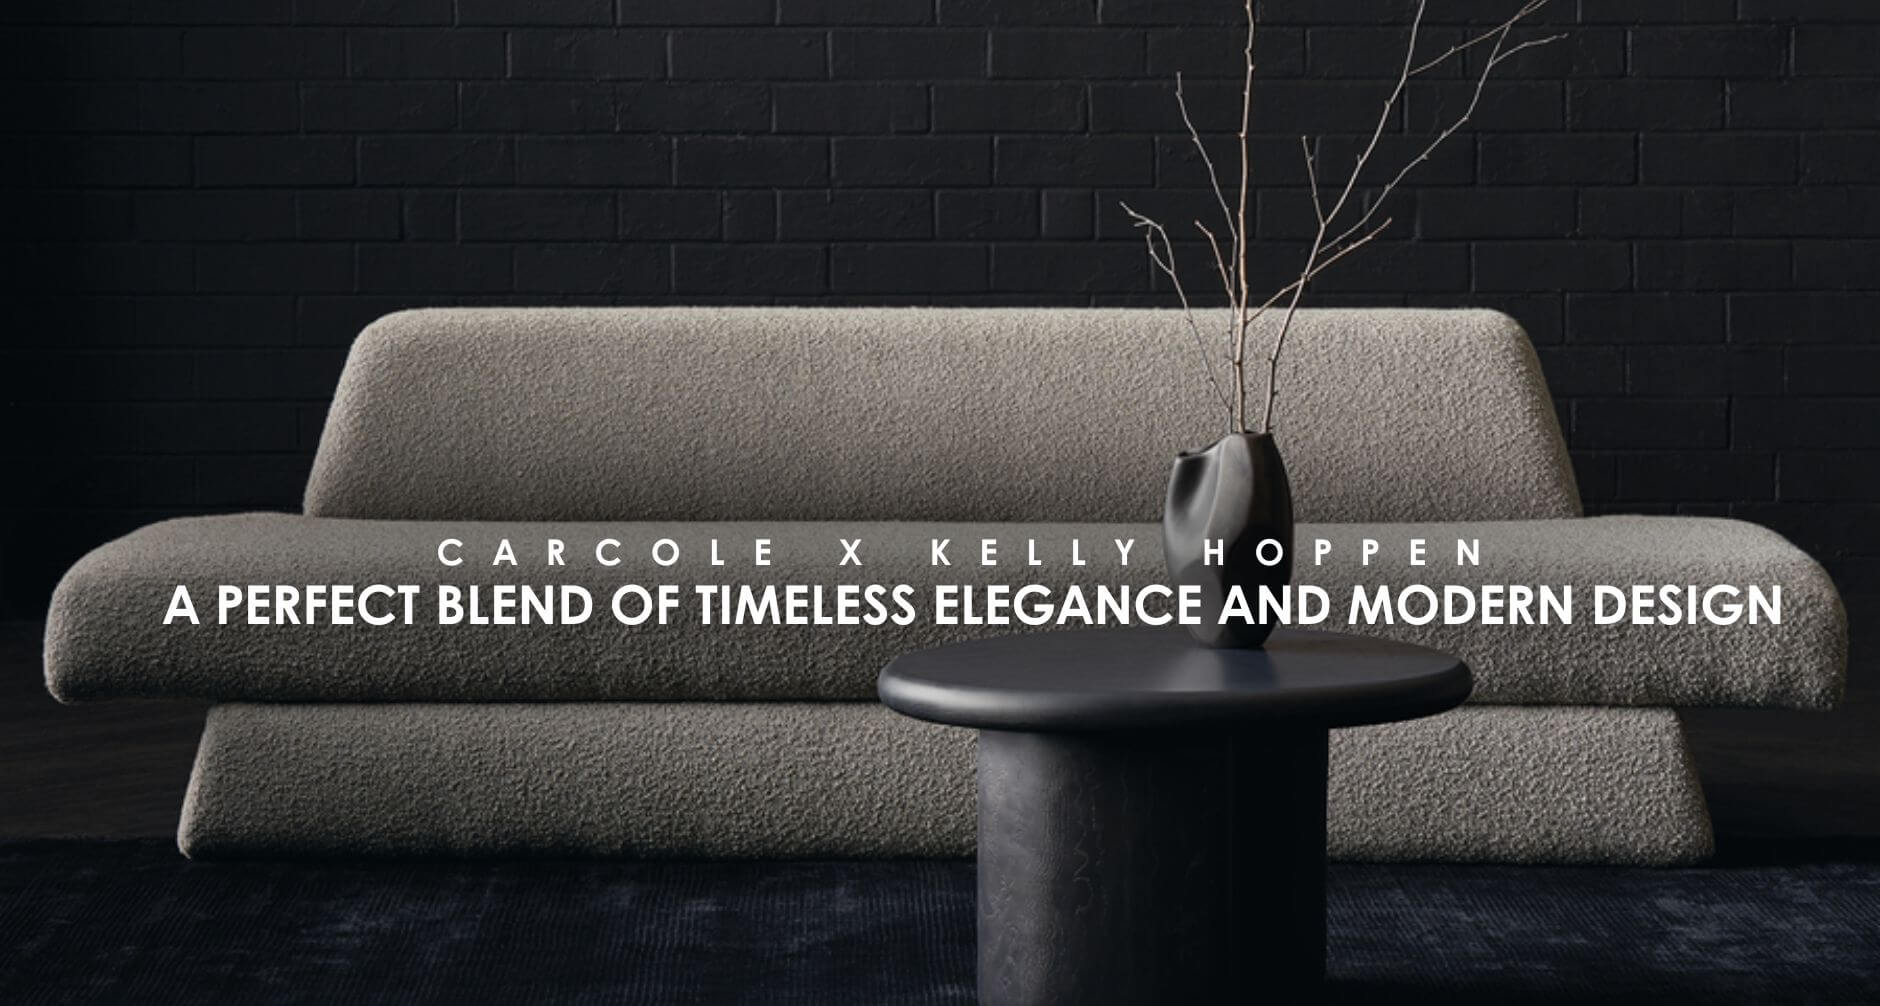 Discover the synergy of Carcole and Kelly Hoppen in a collection that blends timeless craftsmanship with modern design, setting a new standard in home elegance.